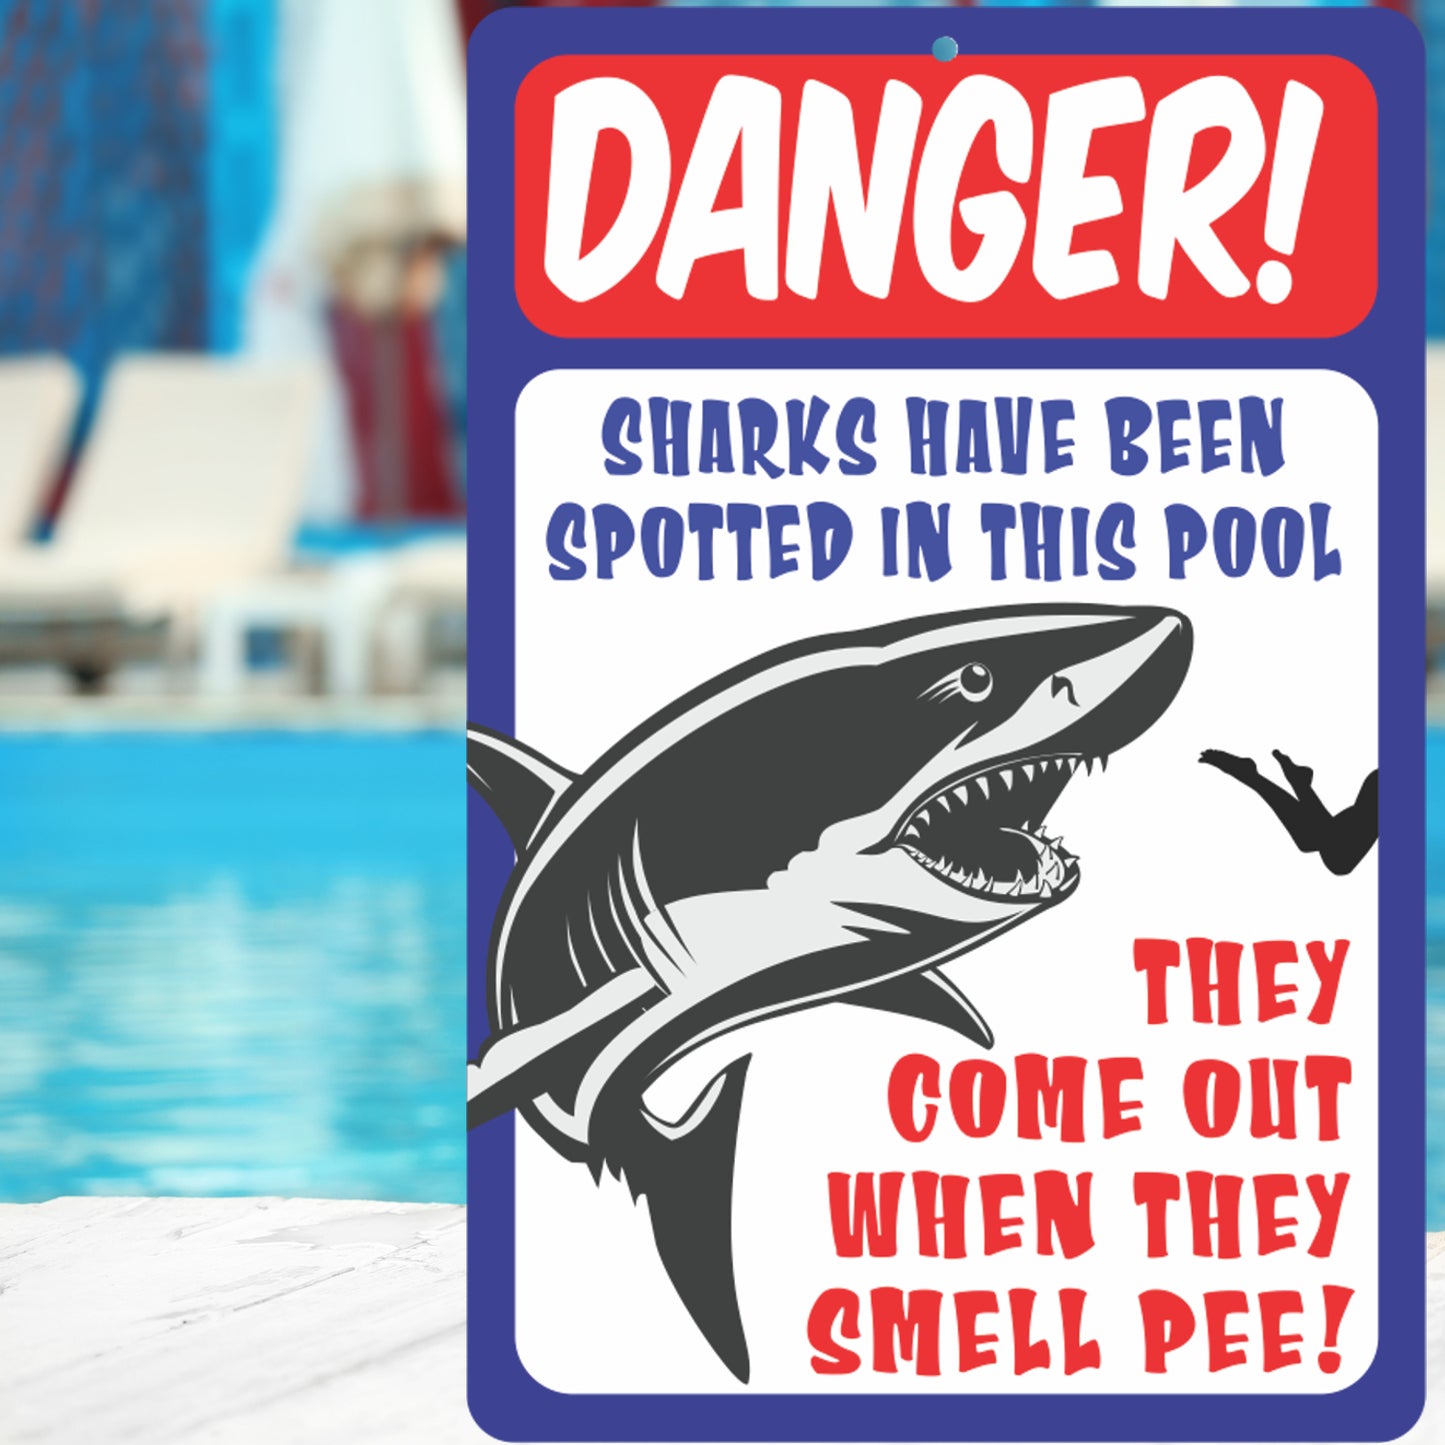 Funny Pool Area Sign  Danger! Sharks Have Been Spotted in This Pool. They Come Out When They Smell Pee! - Size 8 x 12